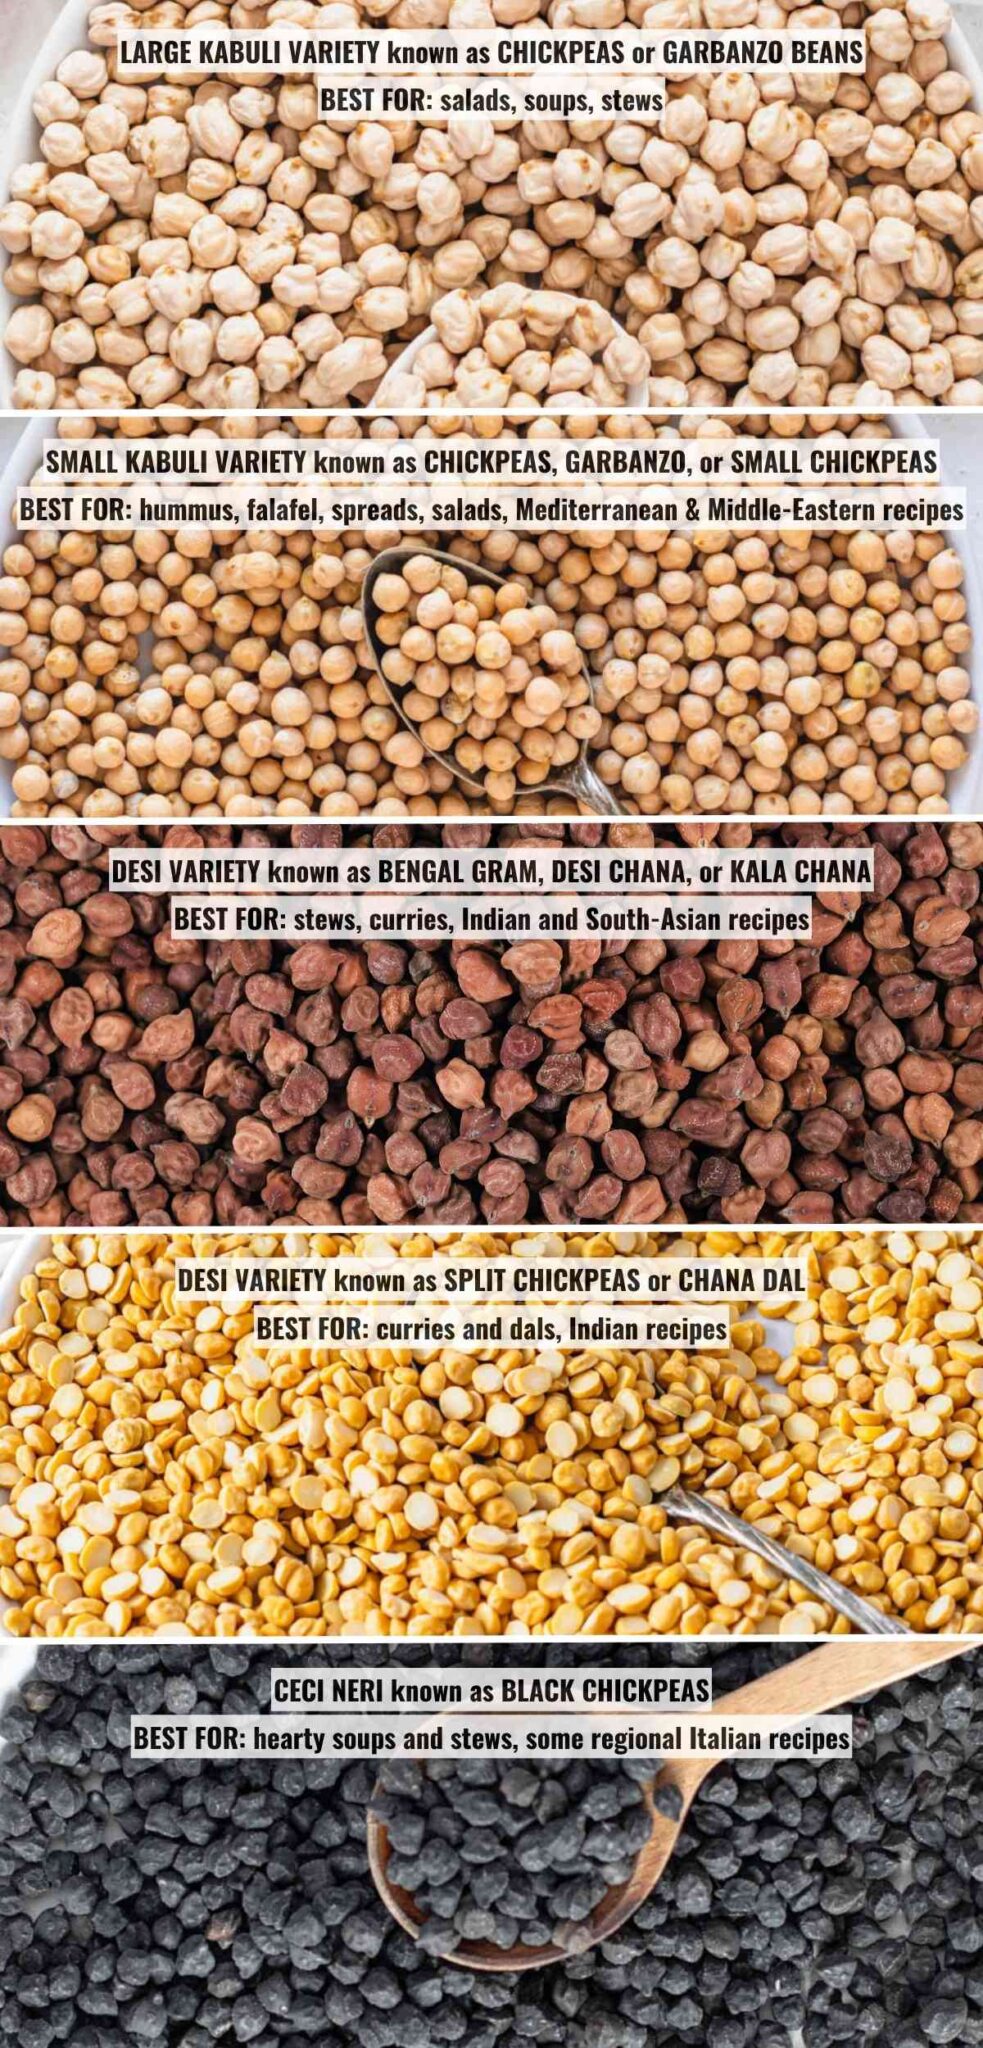 Chickpea varieties and their uses